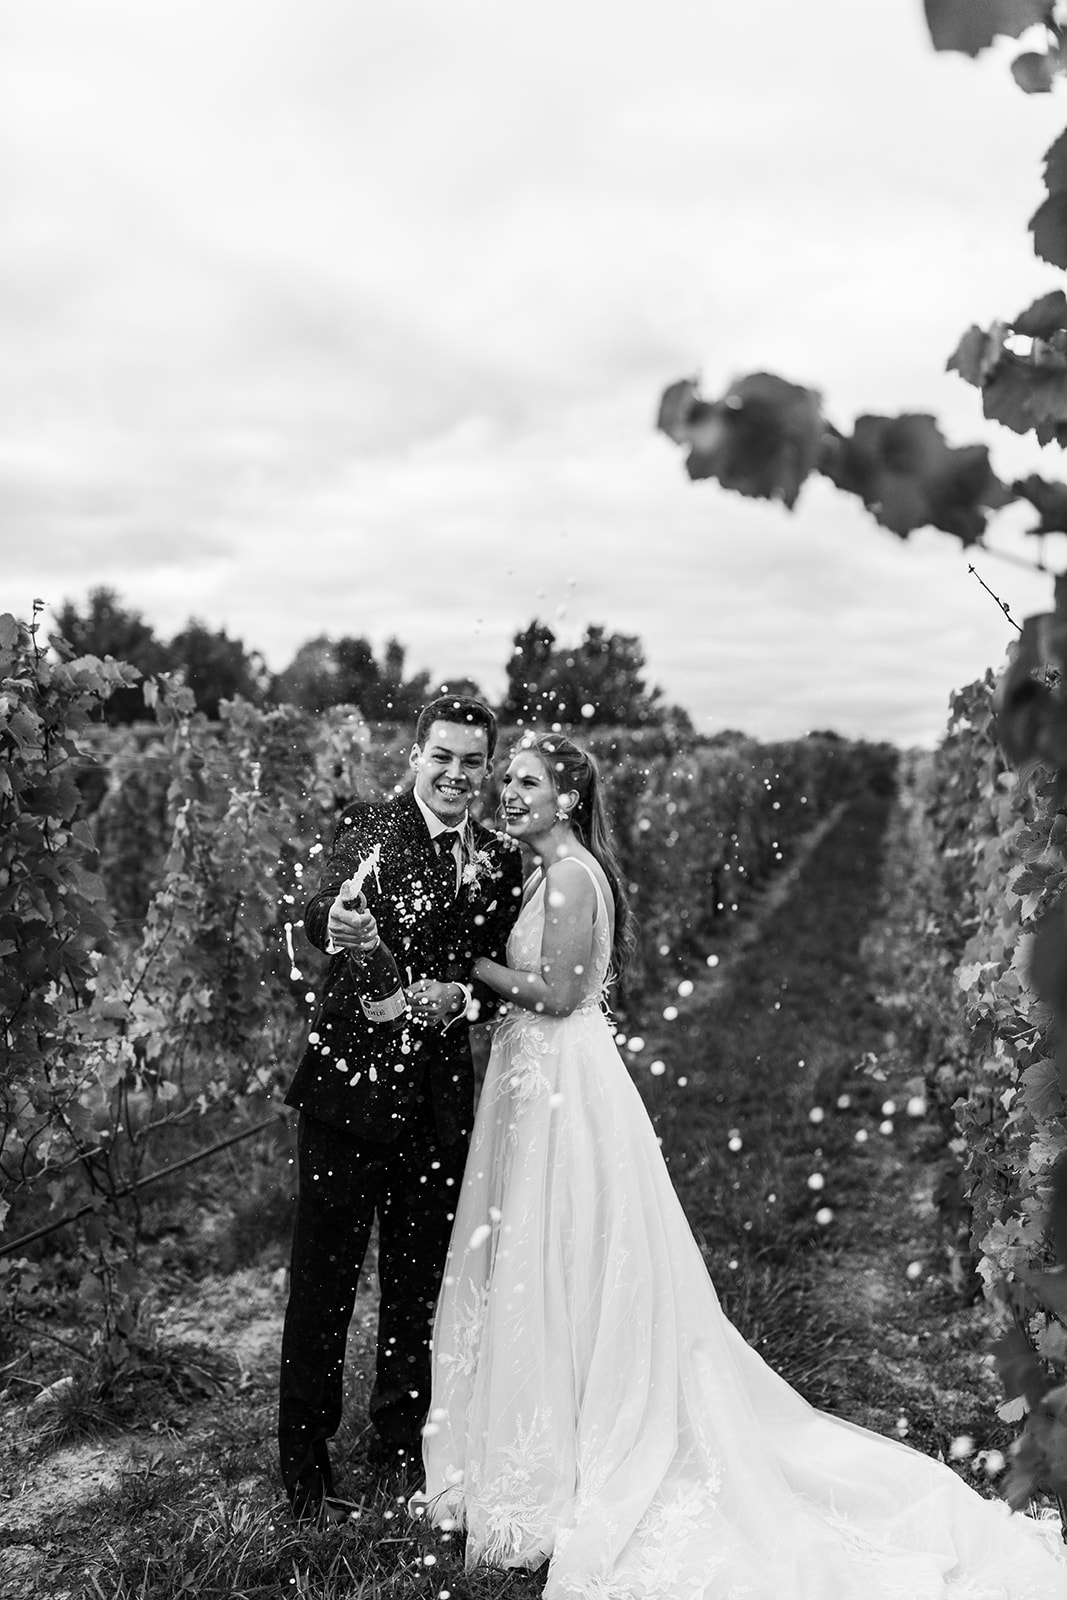 Bride and groom popping champagne at vineyard wedding in Michigan